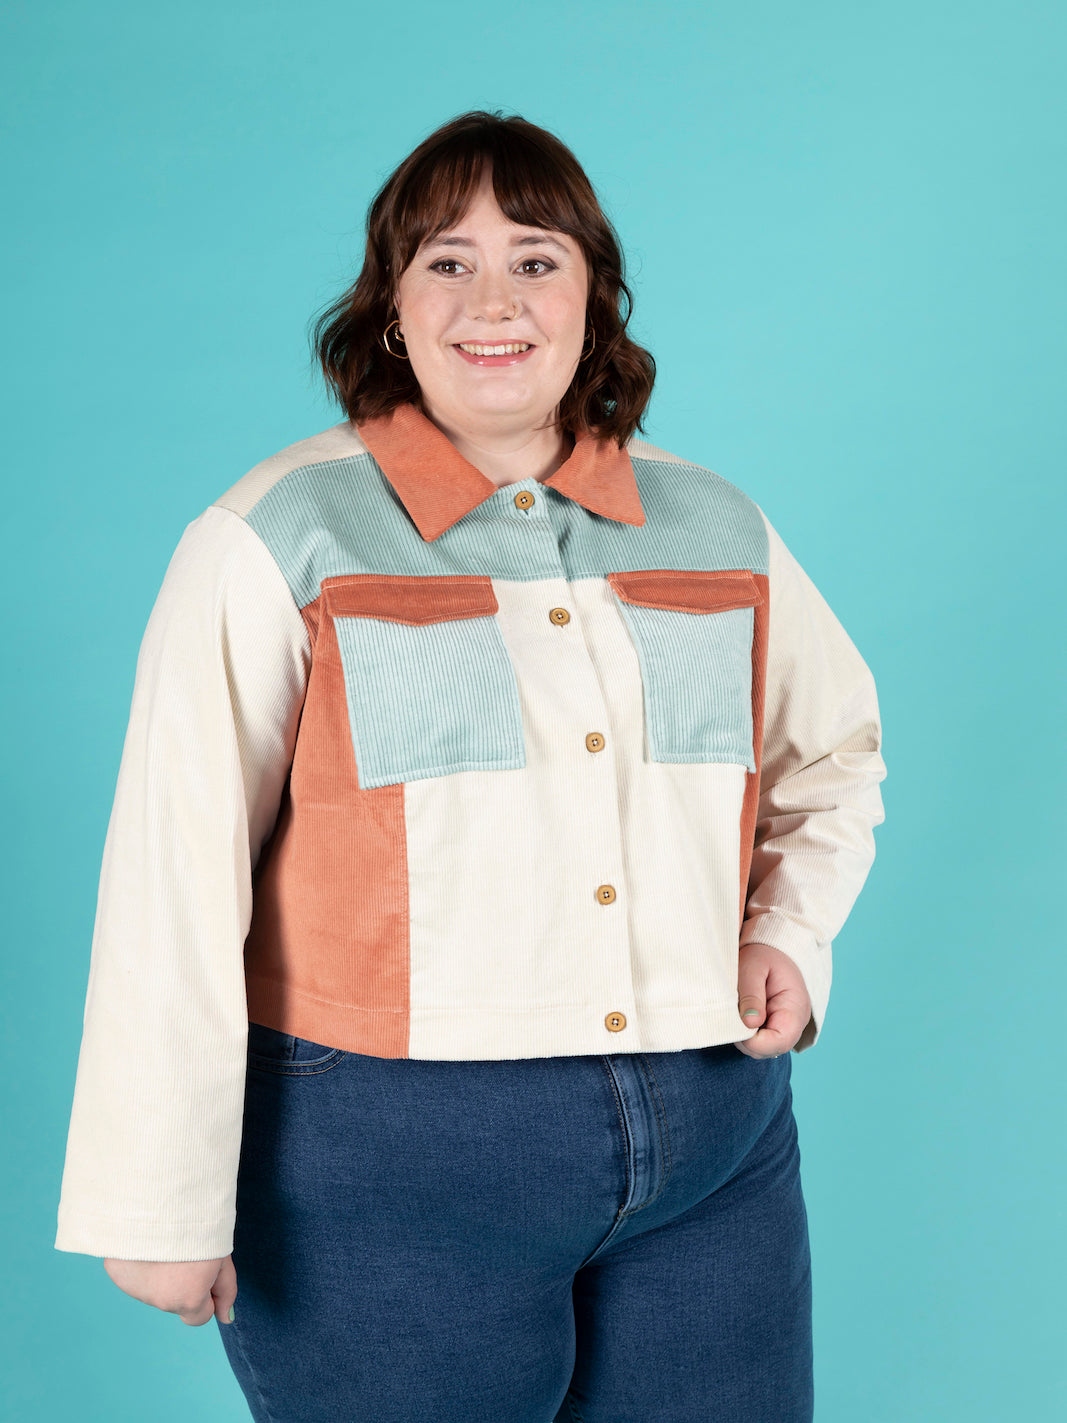 Woman wearing the Sonny Jacket sewing pattern from Tilly and the Buttons on Fold Line. A jacket pattern made in denim, twill, canvas, corduroy, jacquard or wool fabrics, featuring a boxy fit, drop shoulders, pointed collar, front and back yokes, chest poc